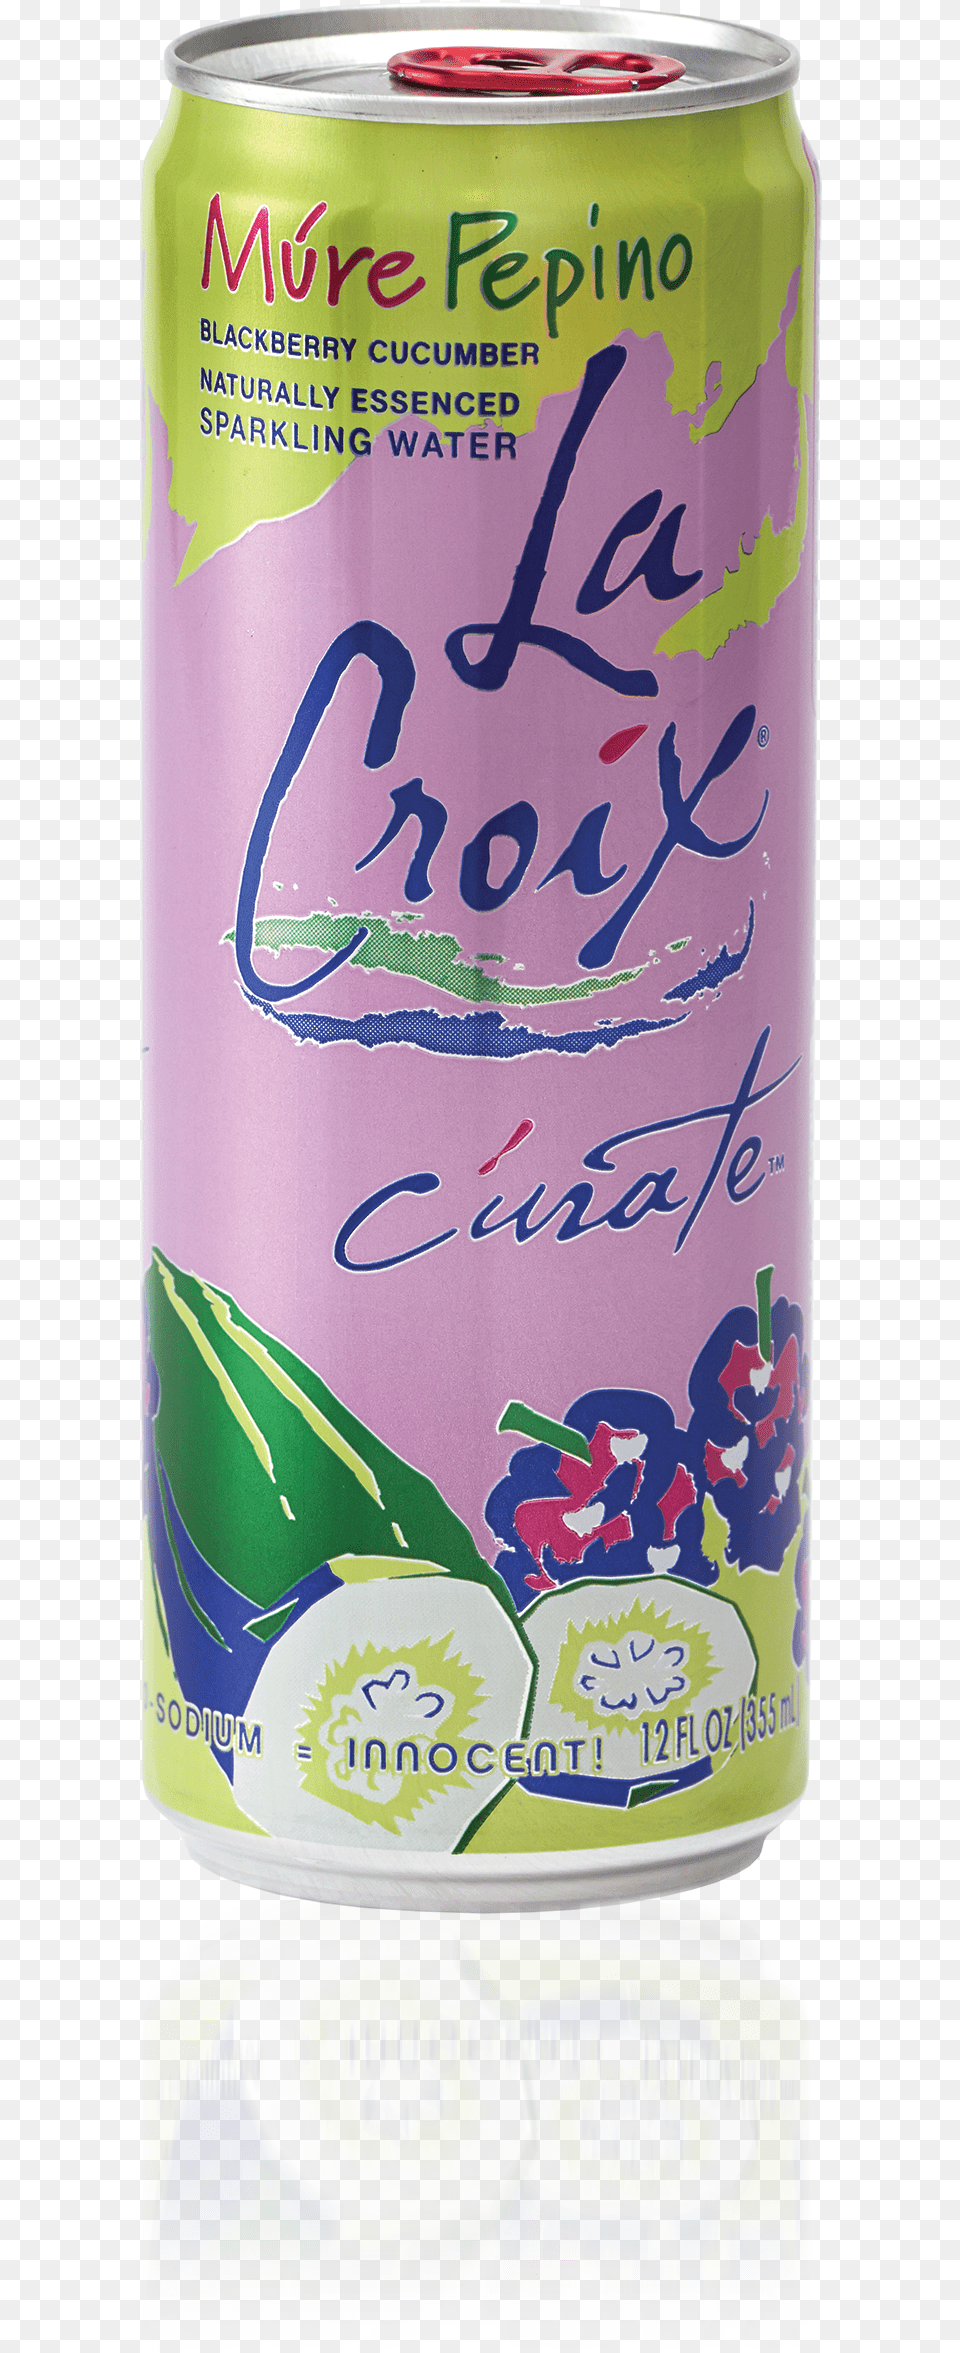 Lacroix Curate Sparkling Water Blackberry Cucumber La Croix Curate Mure Pepino, Can, Tin Png Image